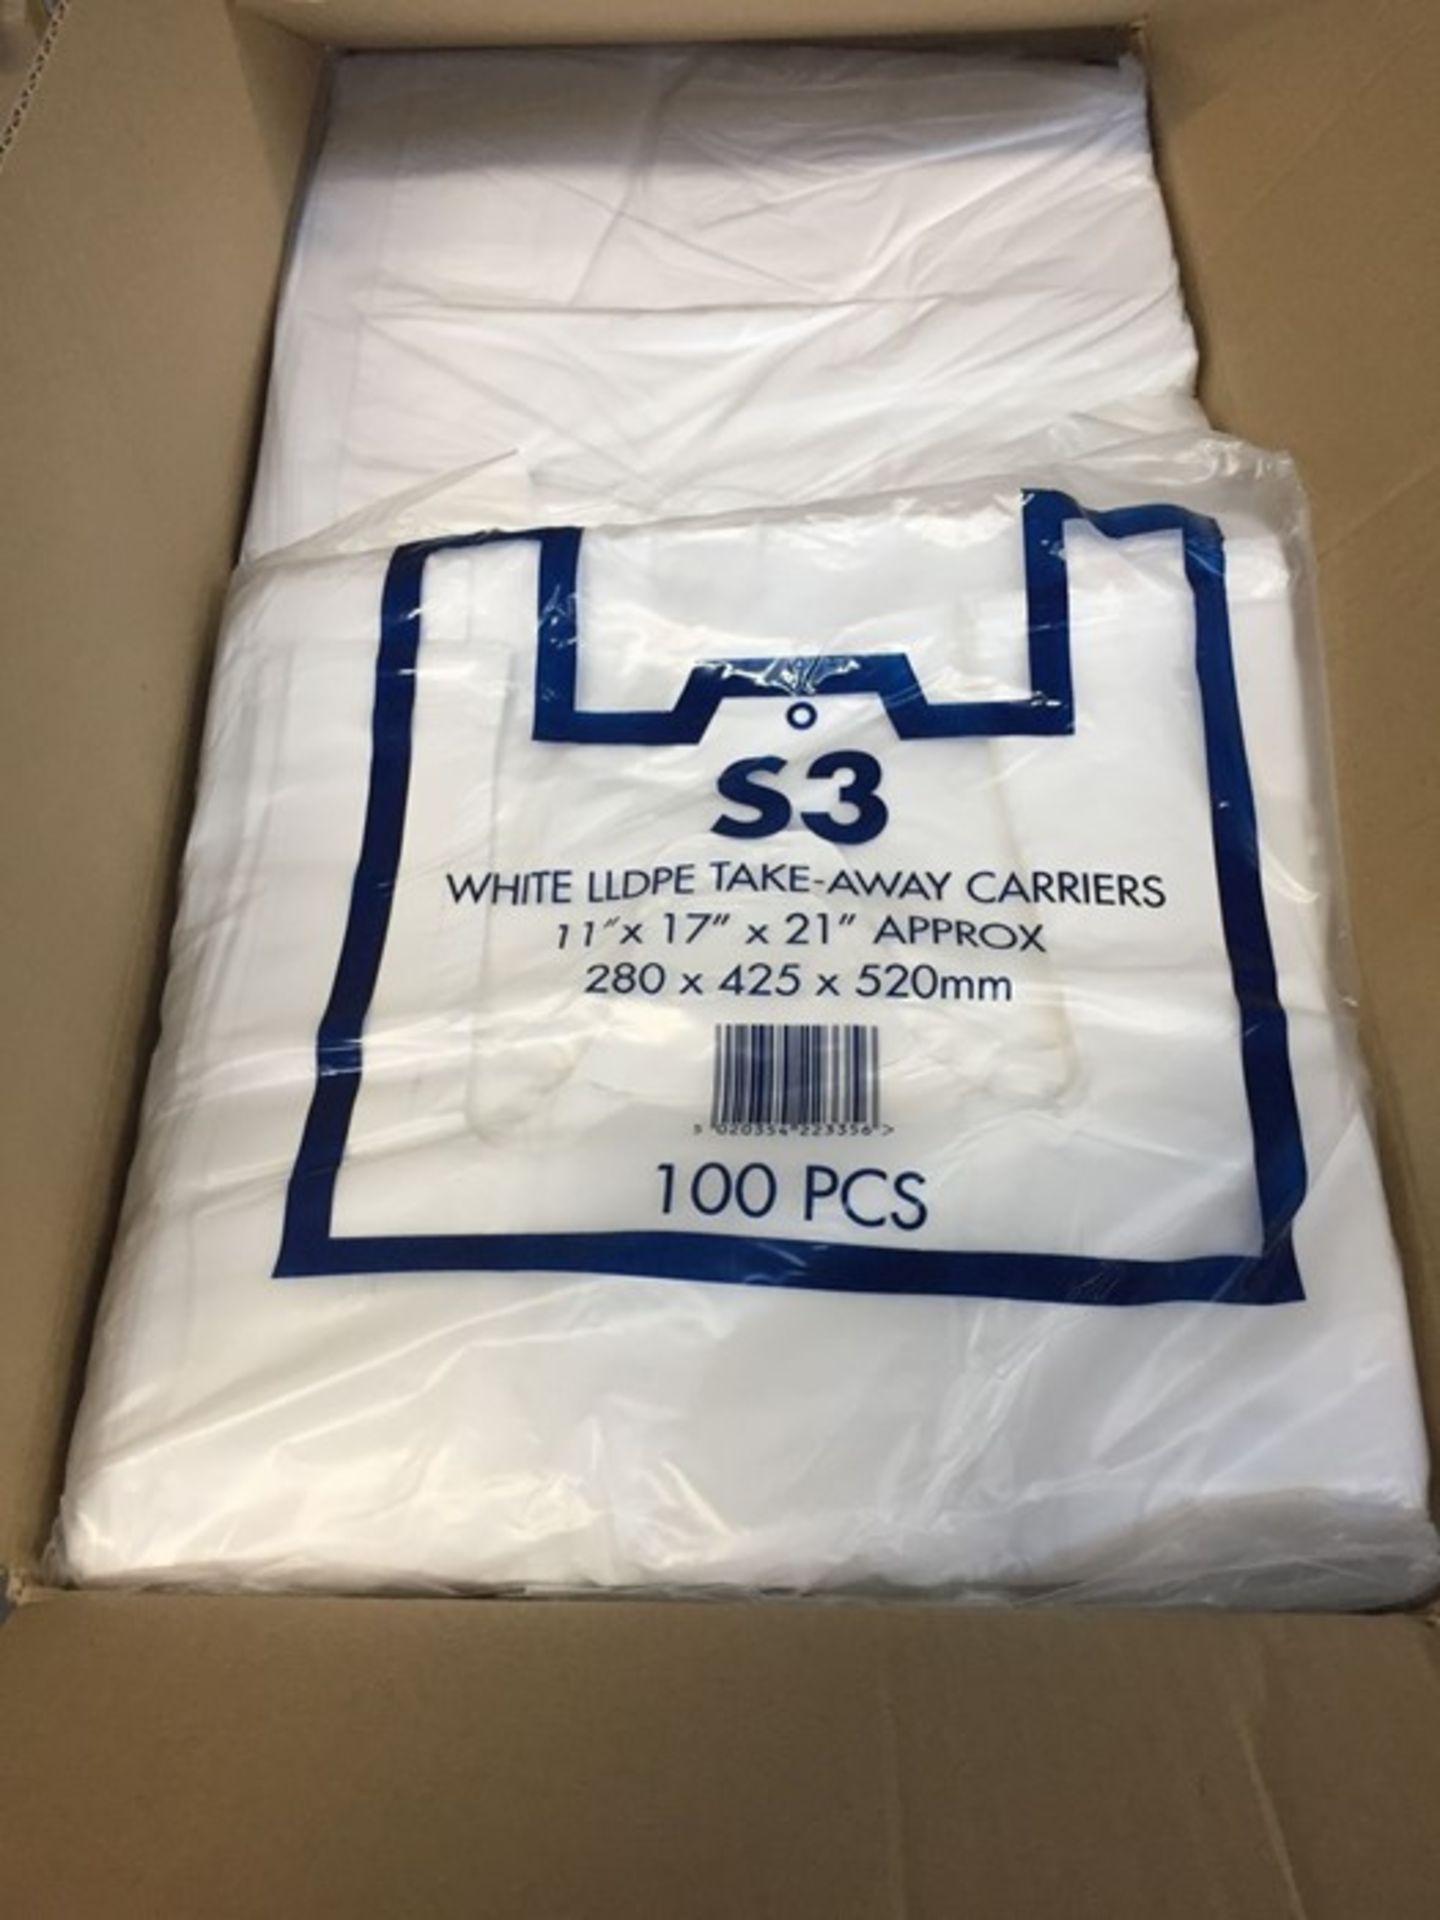 1 LOT TO CONTAIN A BOX OF 1000 LLDPE WHITE TAKEAWAY CARRIER BAGS - L10